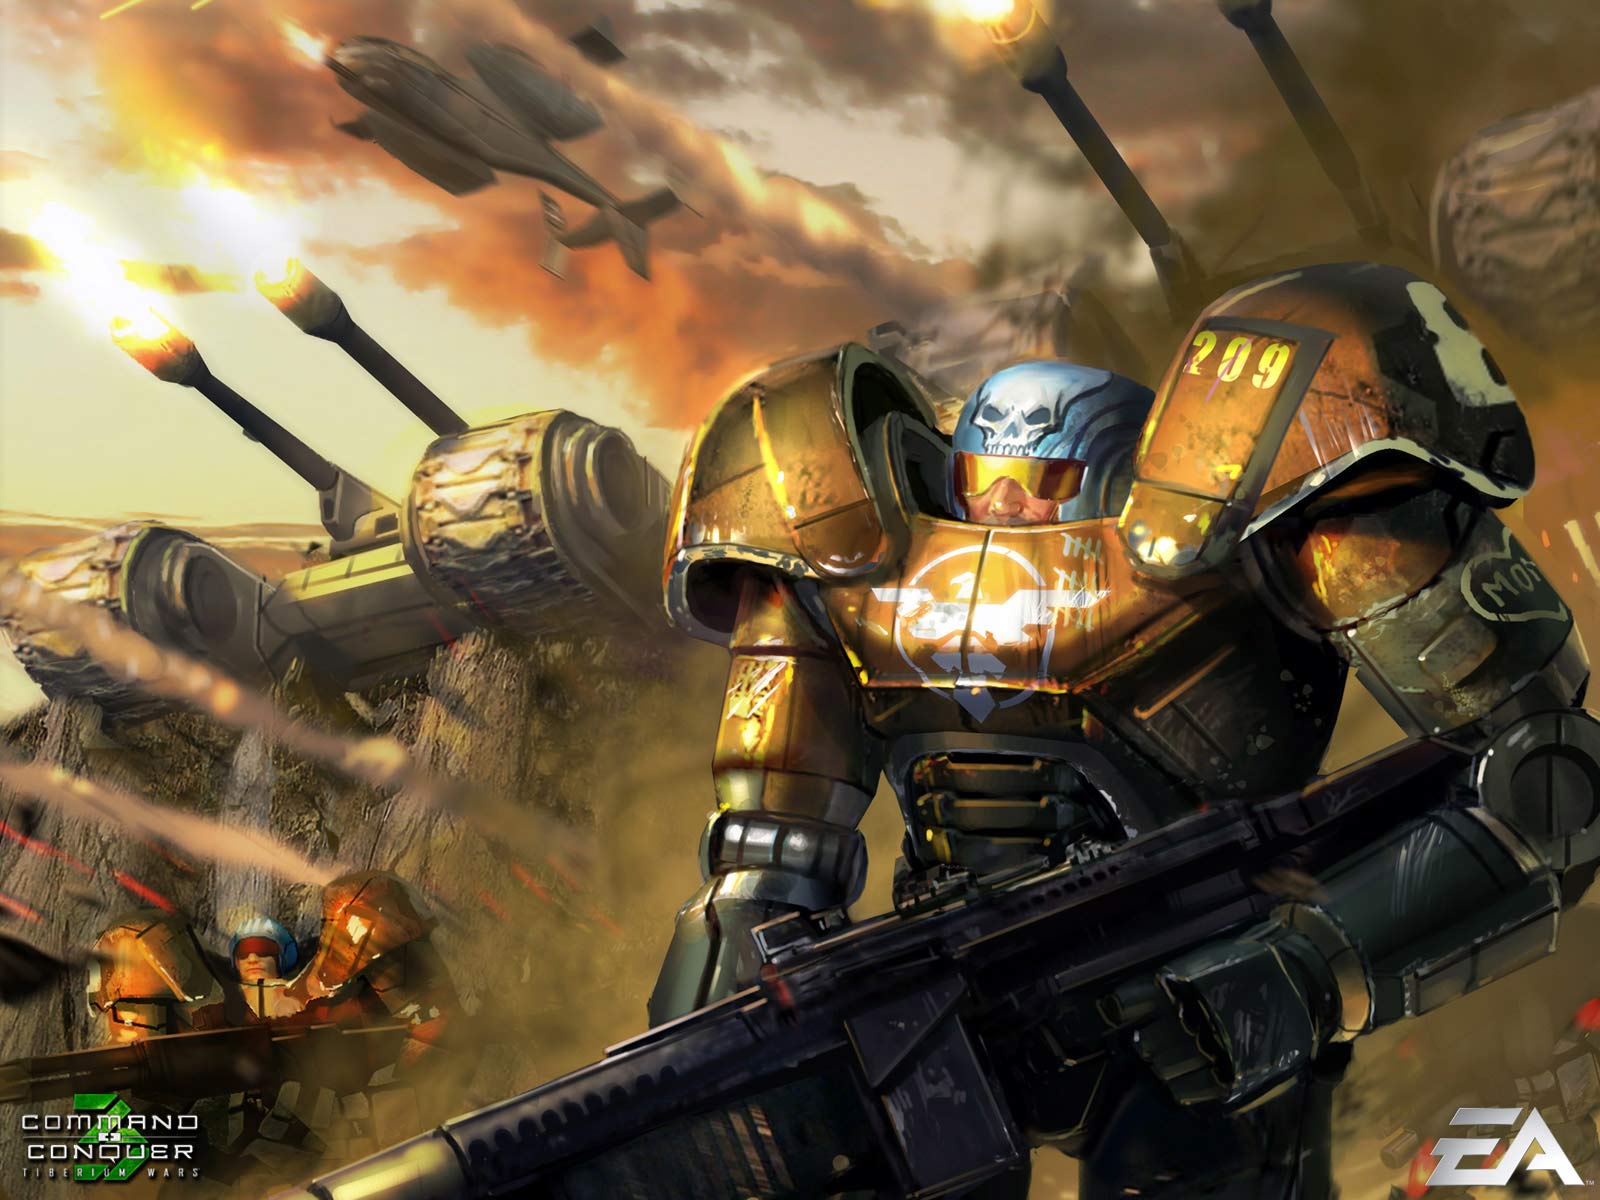 Desktop Wallpaper · Gallery · Games · Command and Conquer 3 | Free ...